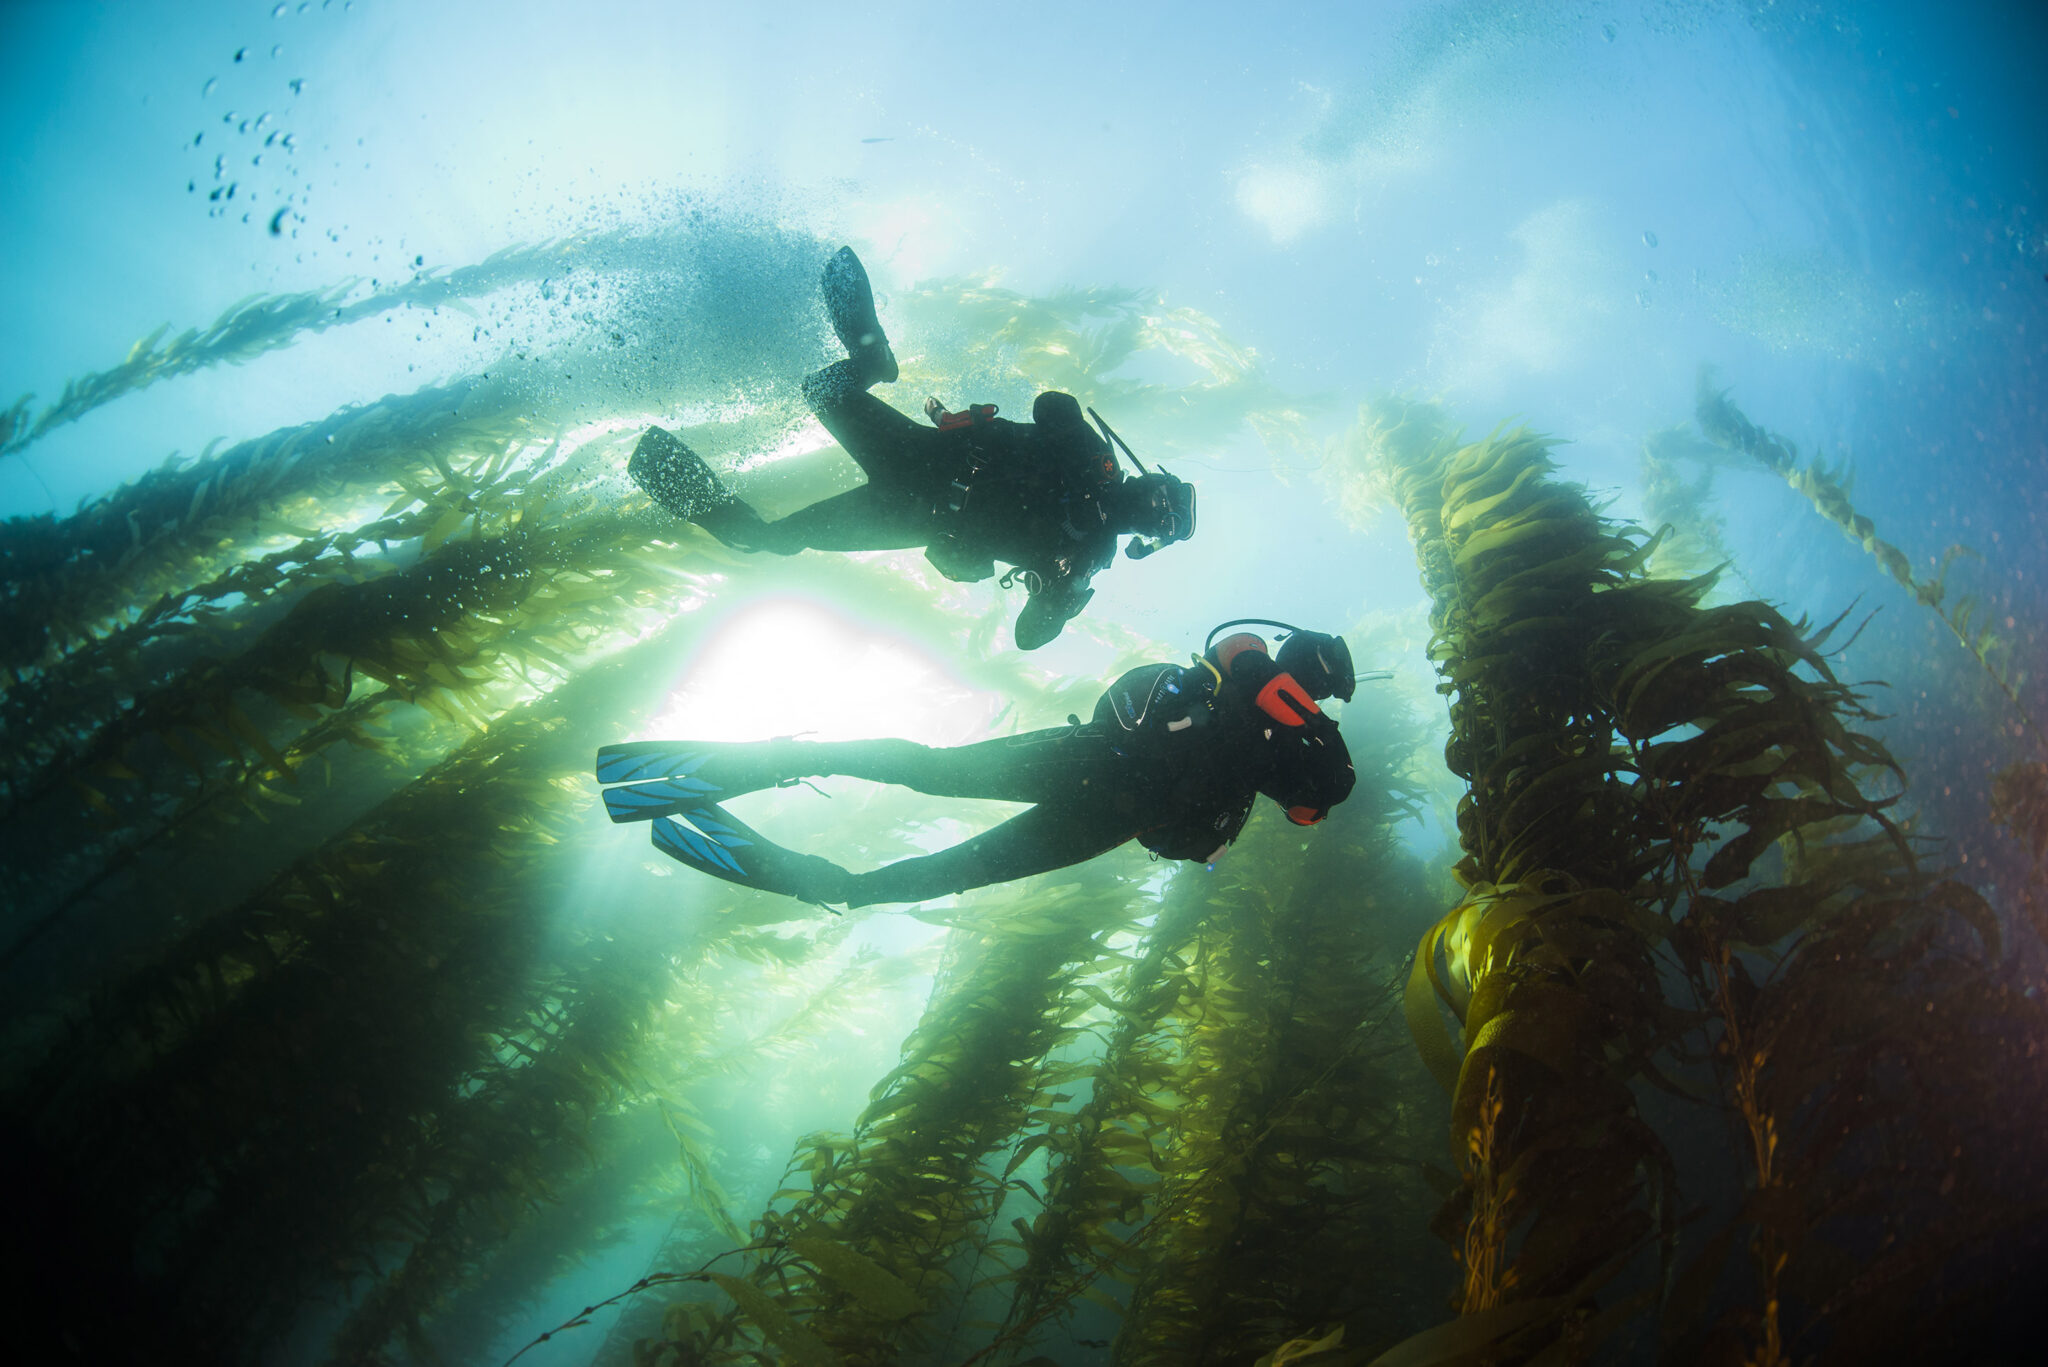 Two scuba divers in a giant kelp forest, one of the fastest-growing types of kelp and which offers shelter for many creatures